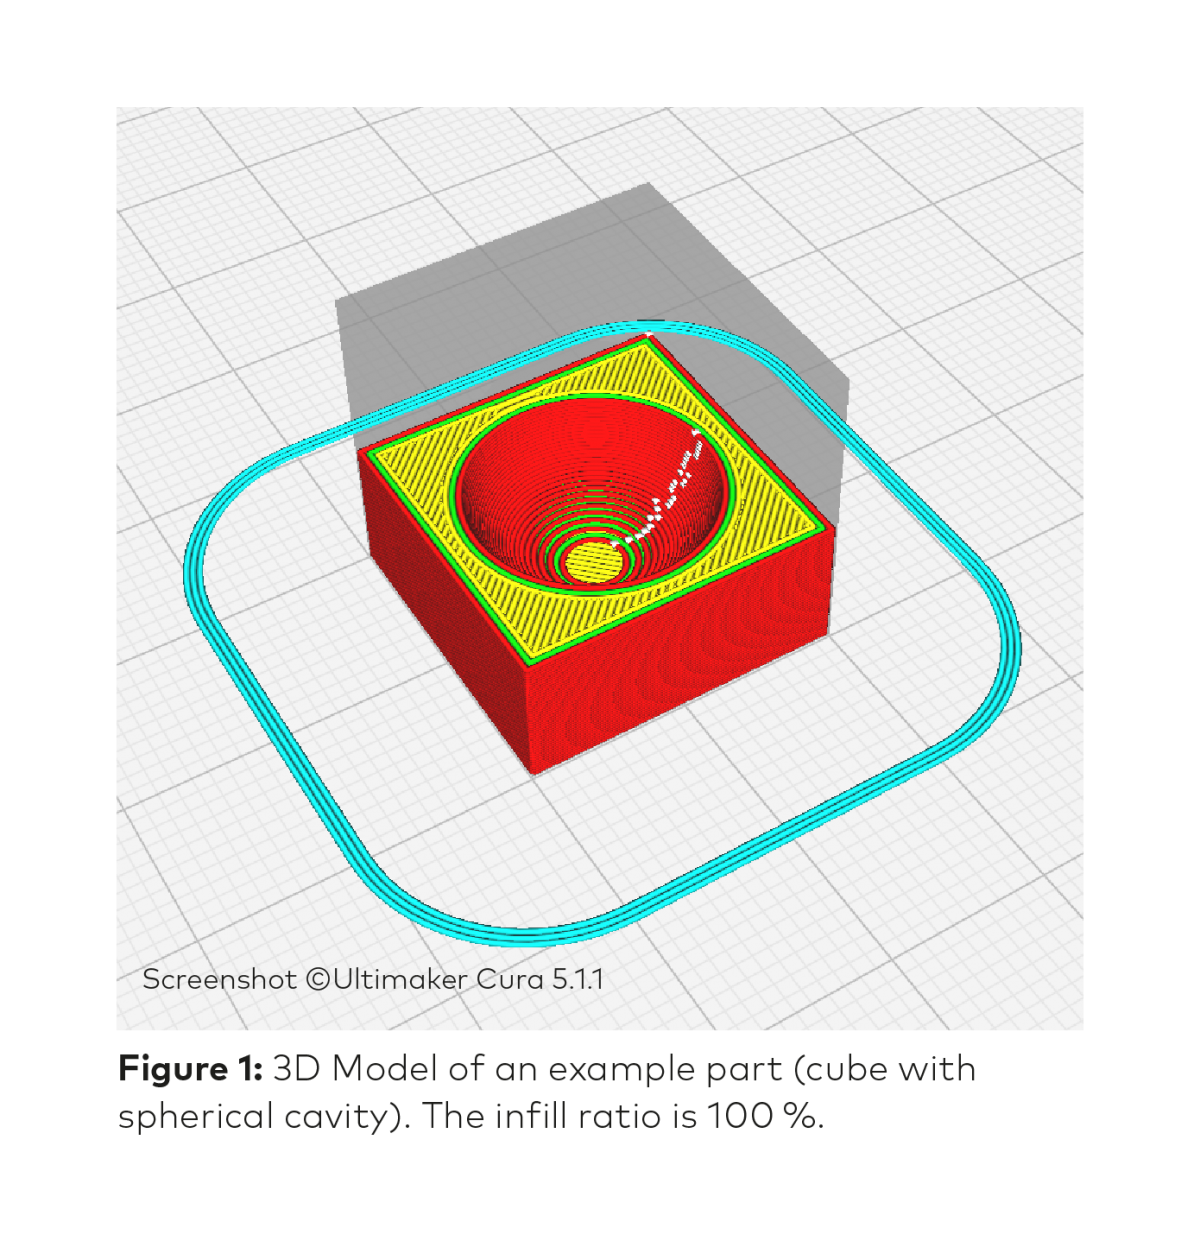 3D Model of an example part (cube with spherical cavity). The infill ratio is 100%. - ©Screenshot ©Ultimaker Cura 5.1.1